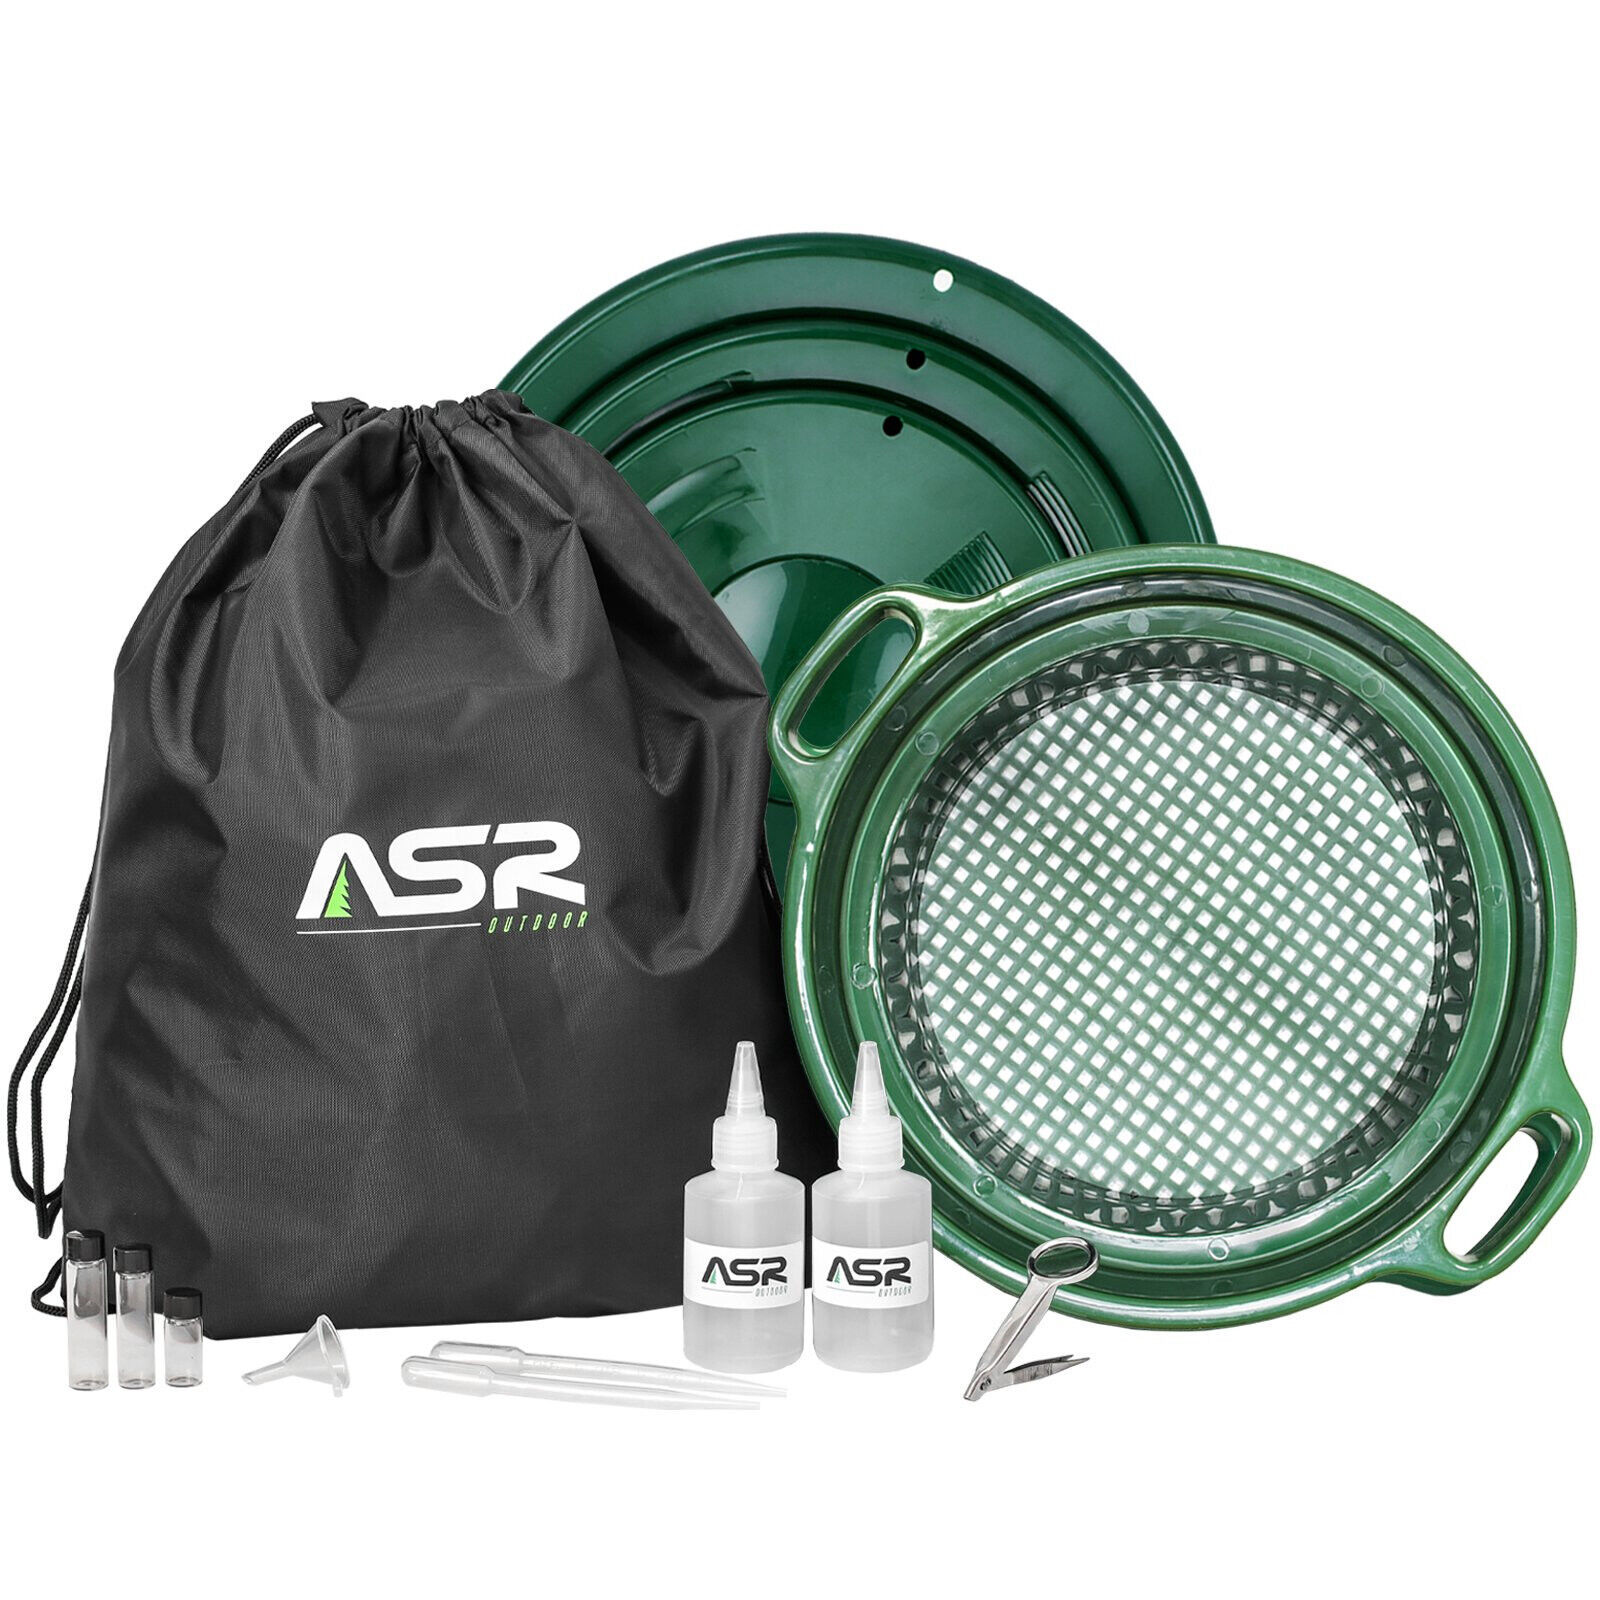 ASR Outdoor 14pc Gold Panning Kit Stackable 1/4 Inch Sifter Backpack Prospecting